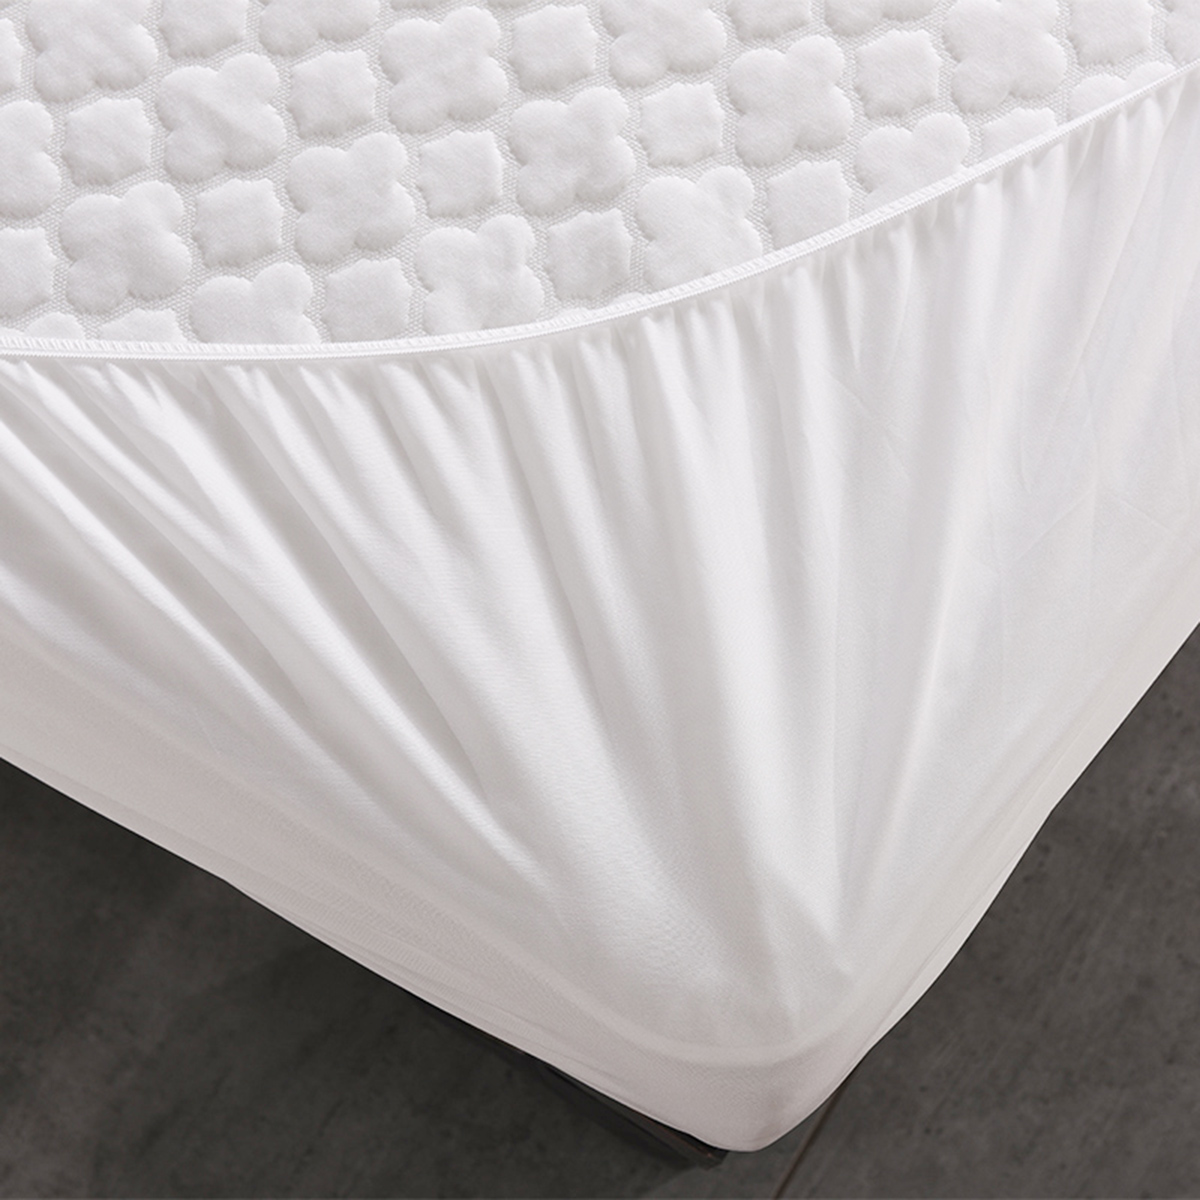 Multi-size-Washable-White-Quilted-Mattress-Covers-Waterproof-Protector-Pad-With-Tightly-Elastic-Band-1692754-14